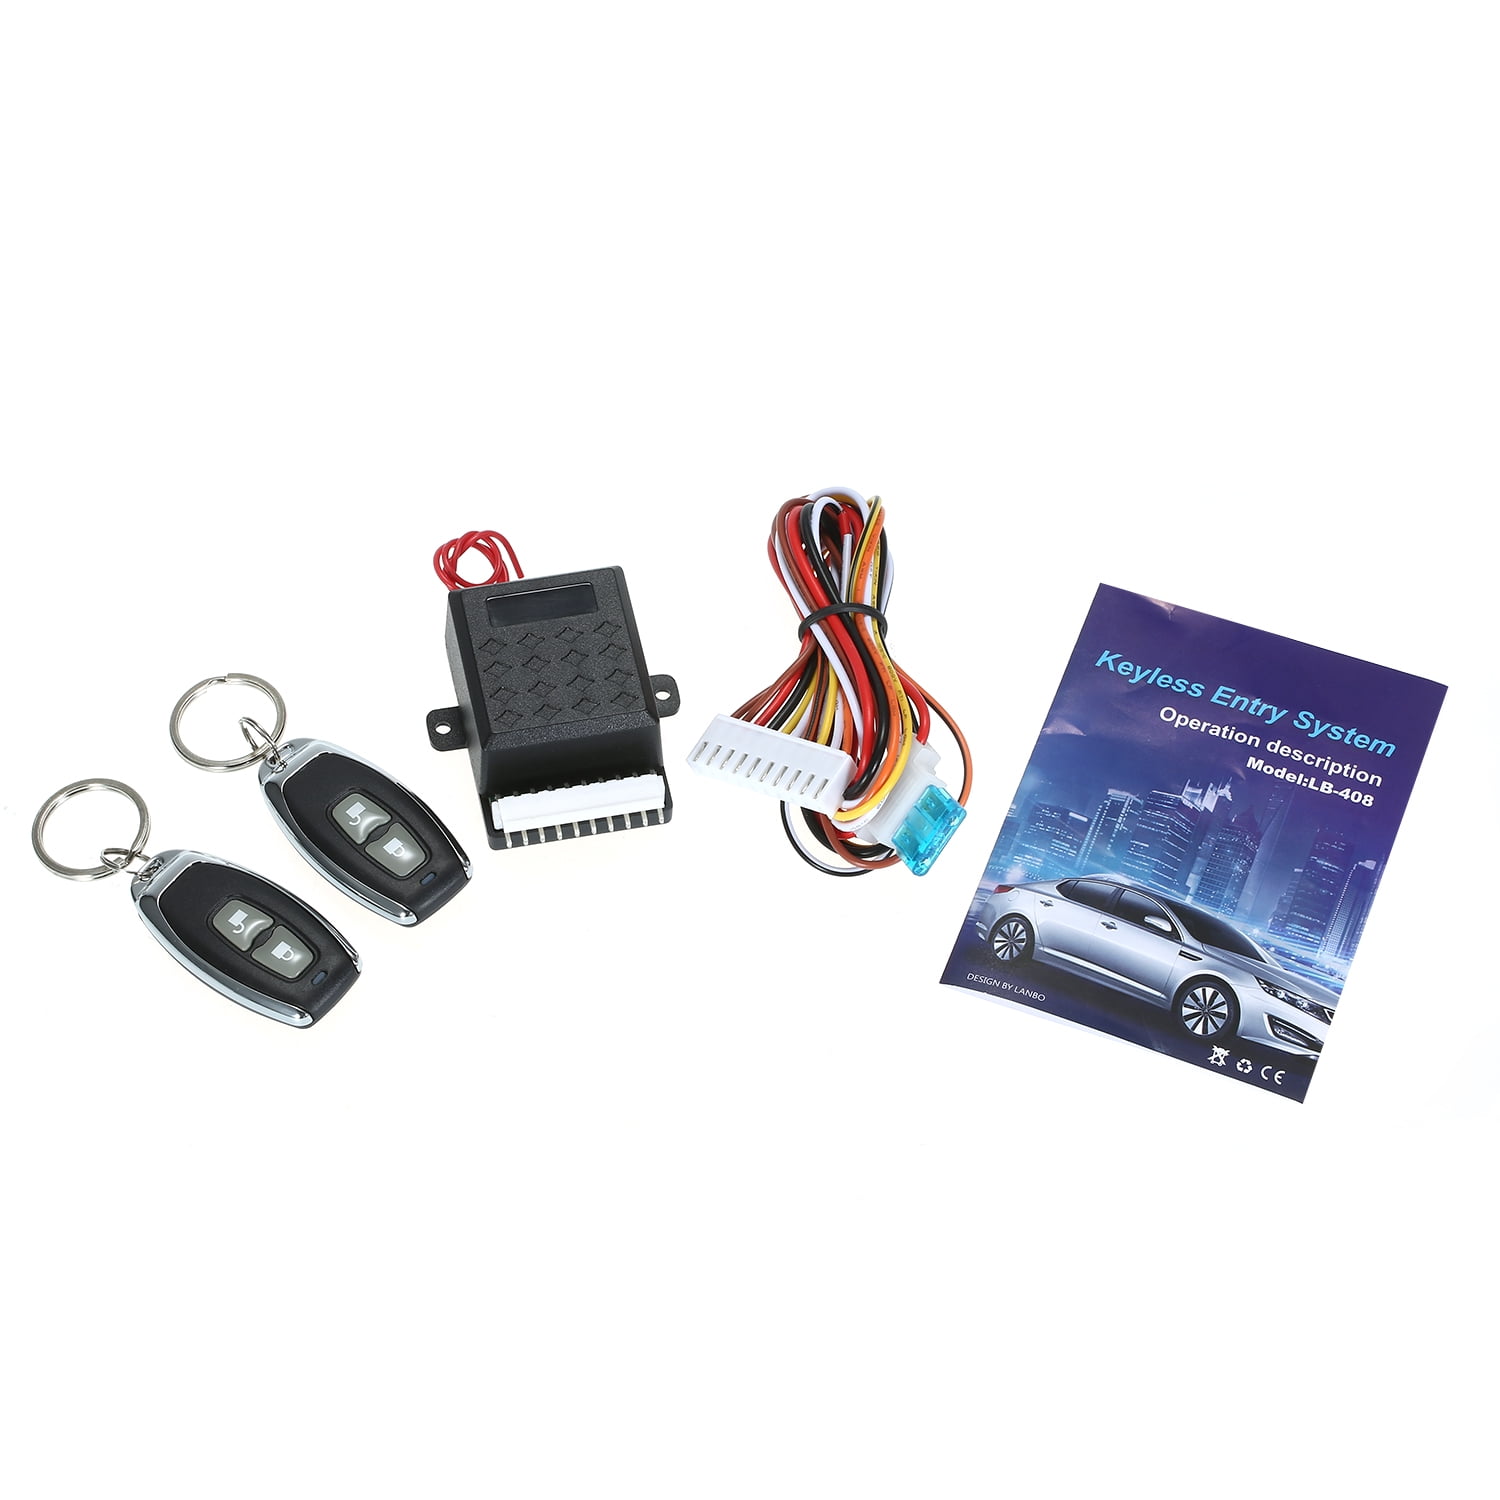 Dciustfhe Universal Car Alarm Systems Auto Remote Central Kit Door Lock Keyless Entry System Central Locking with Remote Control